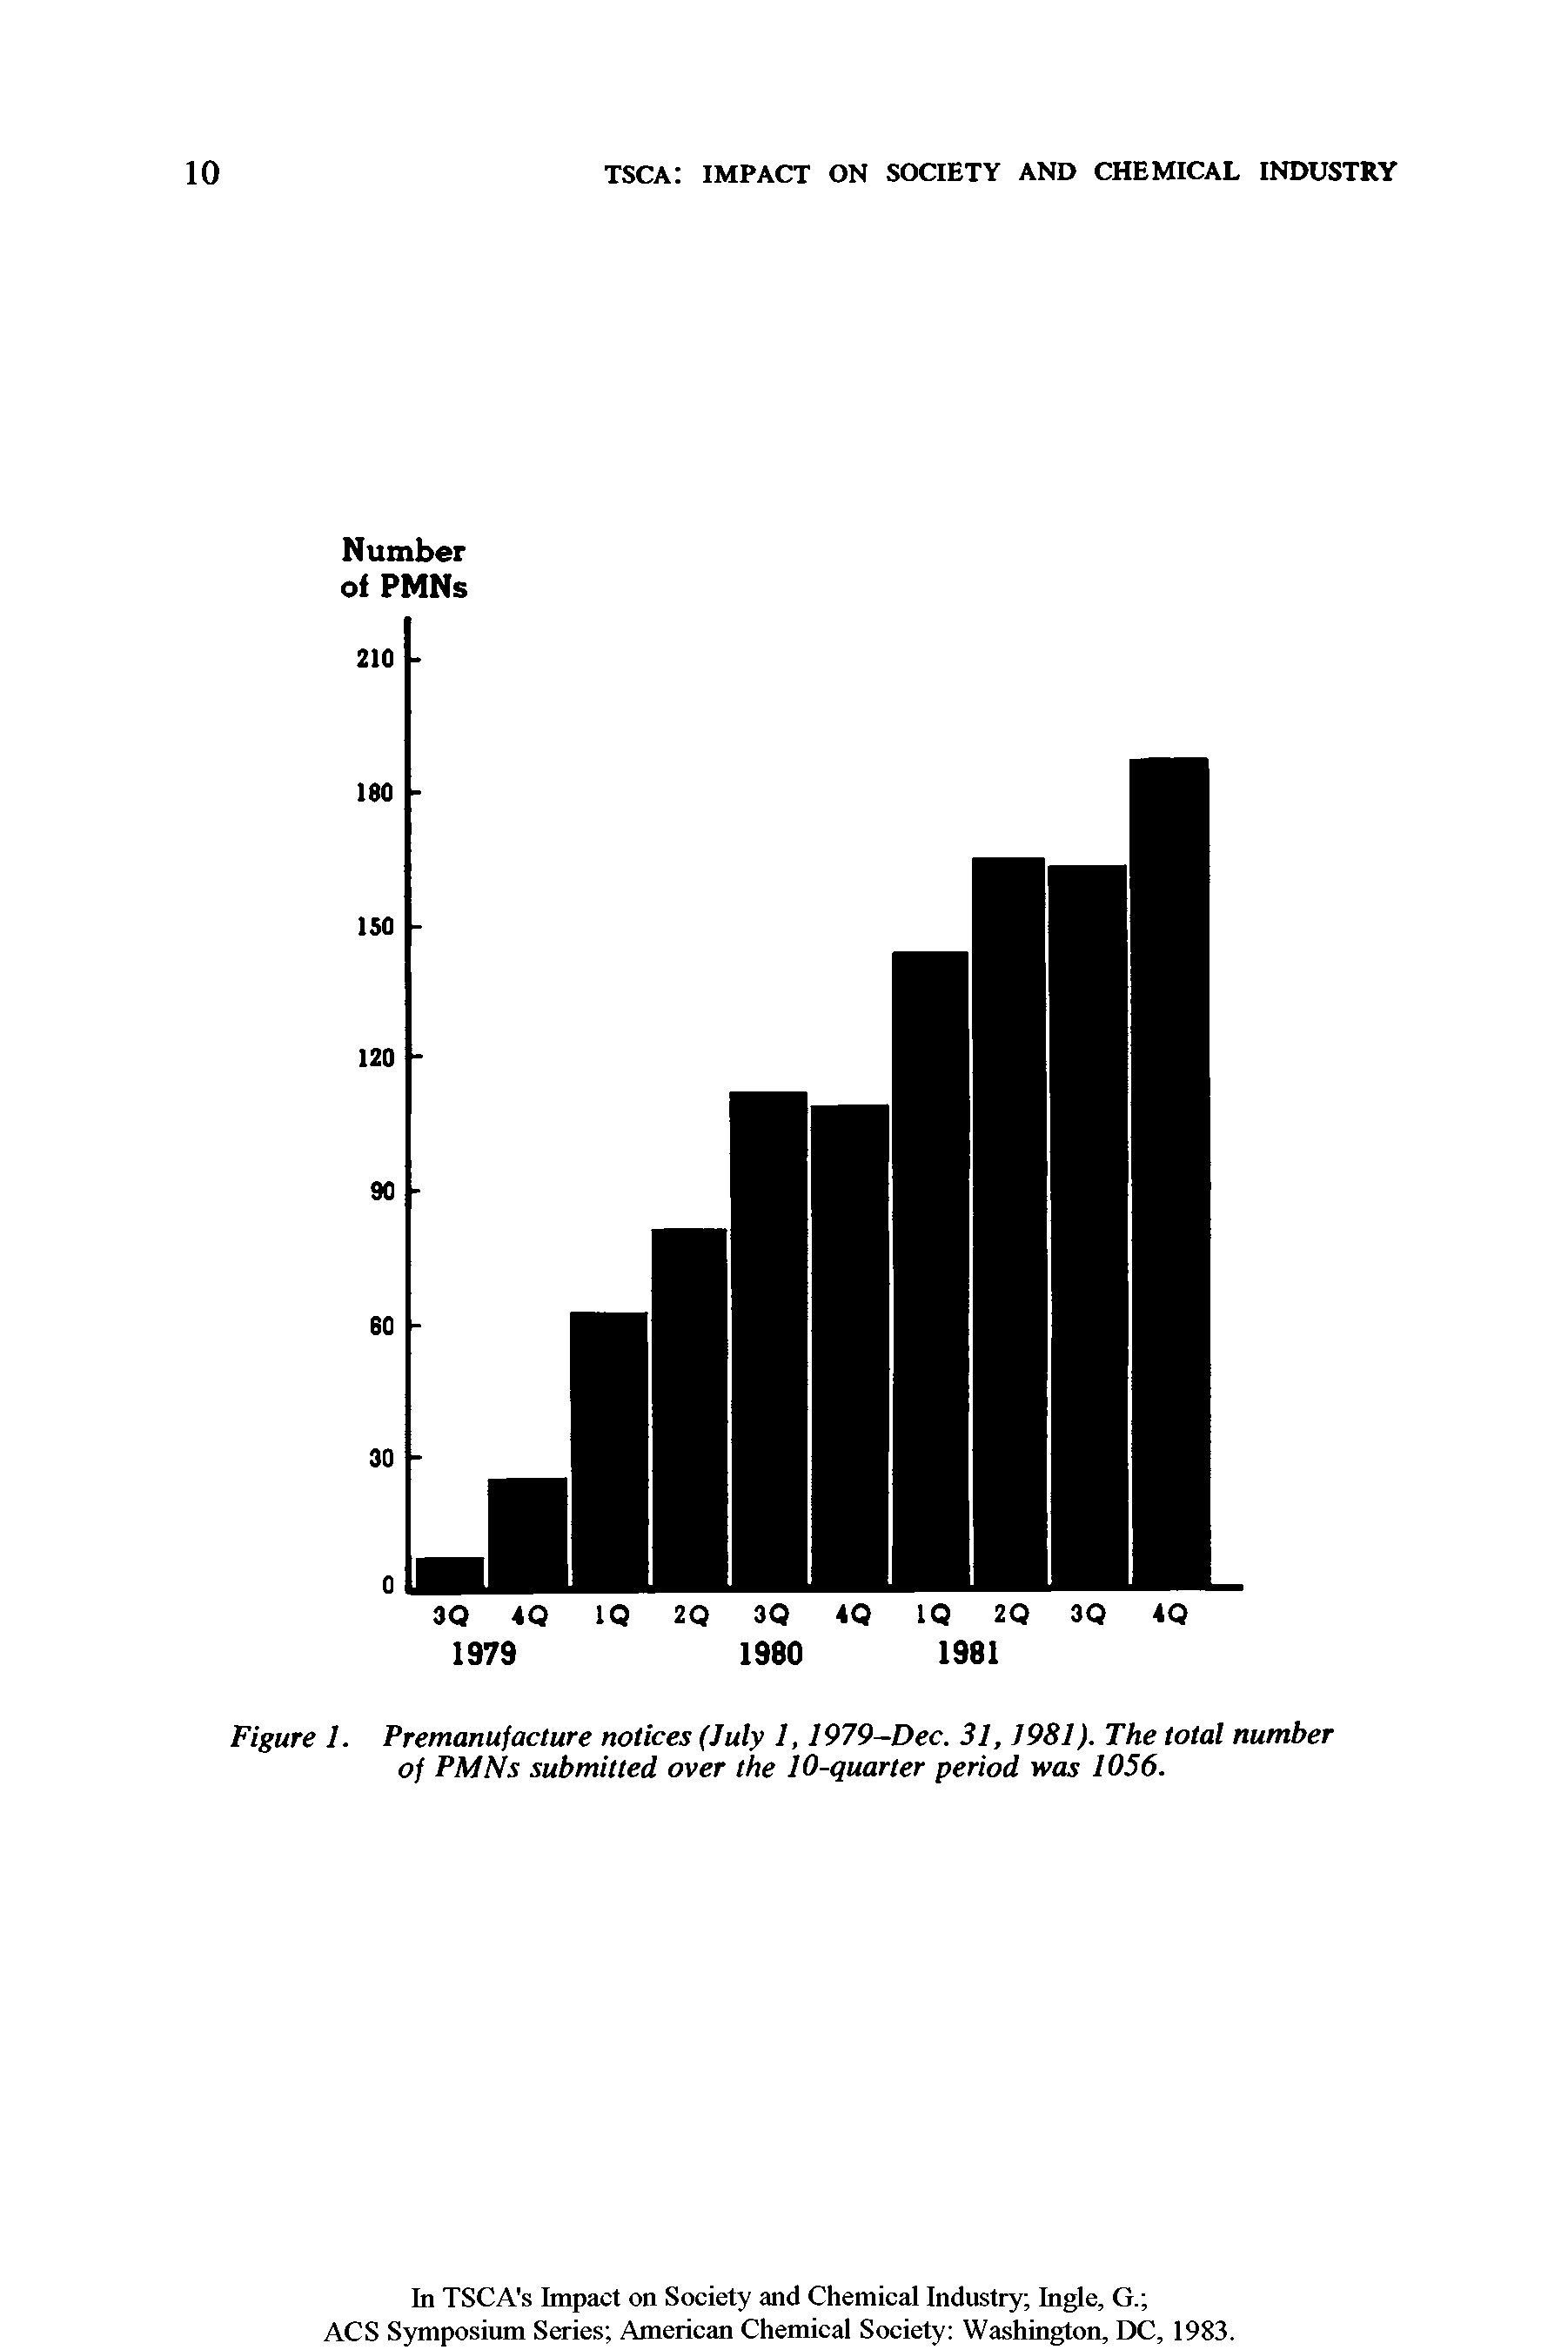 Figure 1. Premanufacture notices (July 1,1979-Dec. 31,1981). The total number of PMNs submitted over the 10-quarter period was 1056.